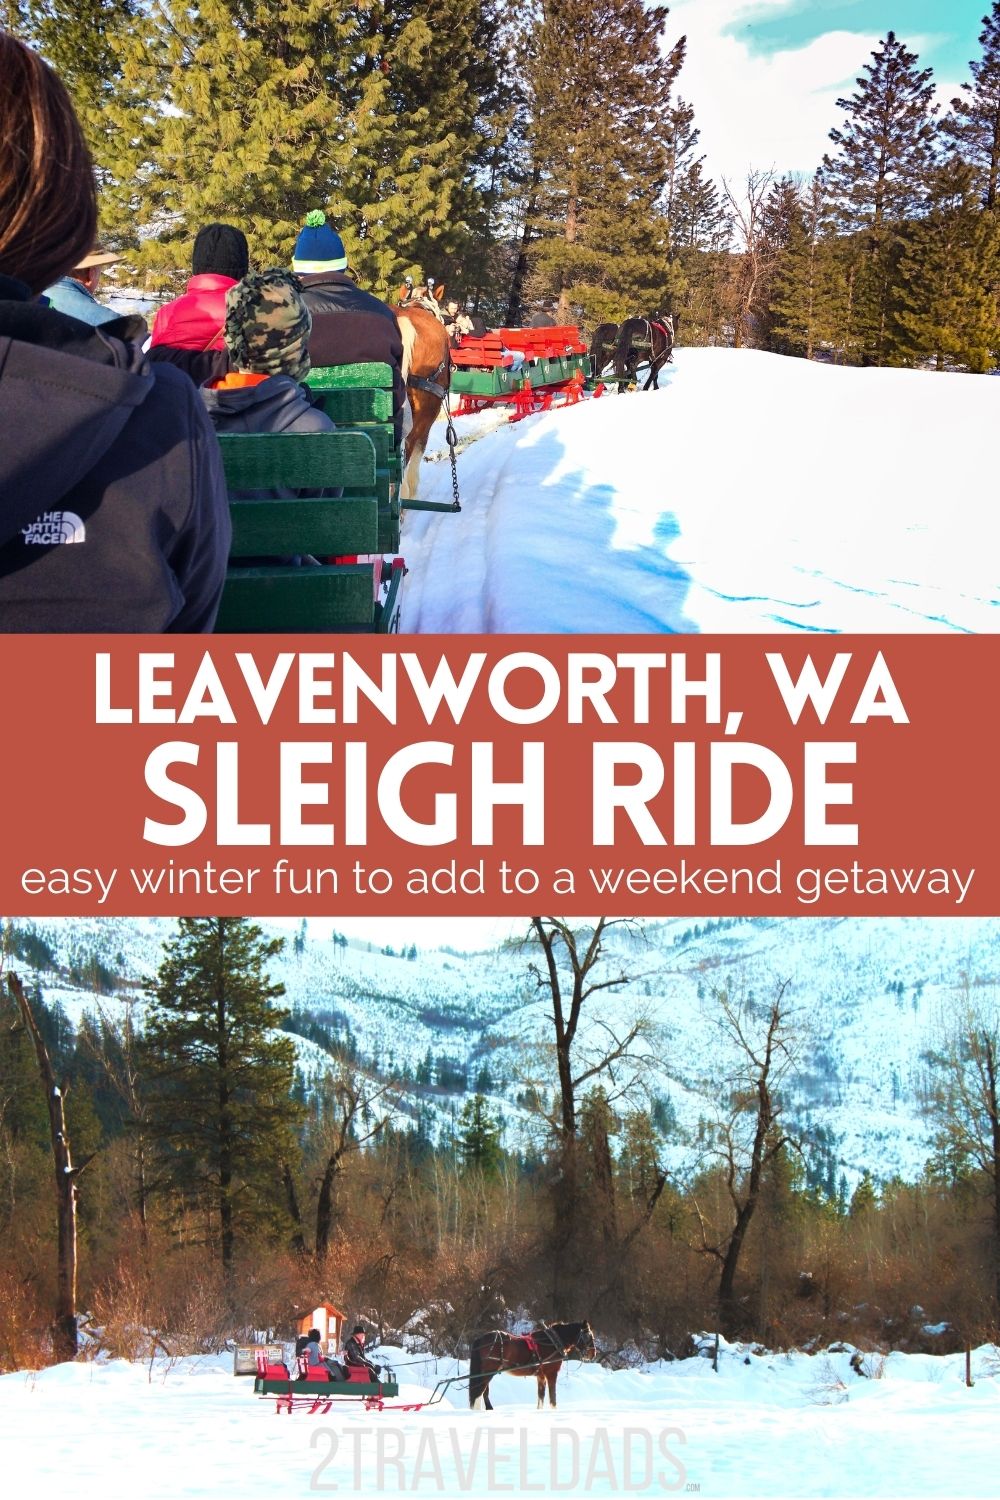 A sleigh ride is the perfect addition to a trip to Leavenworth, Washington. See what to expect and how to plan for getting out on the snow with kids during the Pacific Northwest winter.